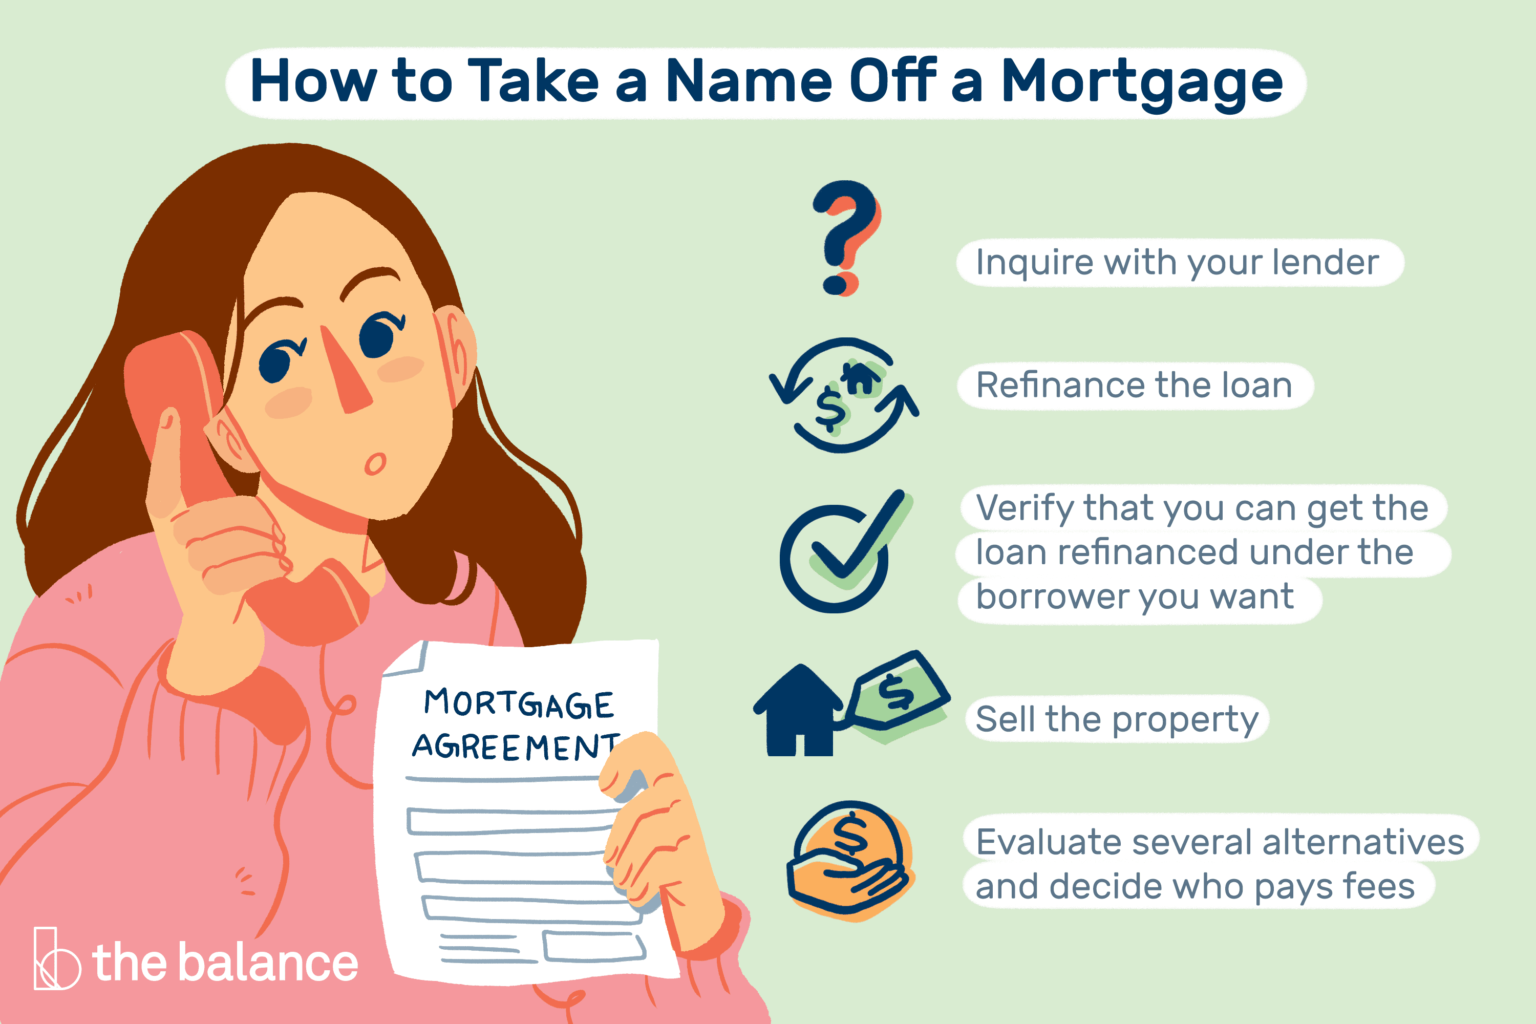 How Do I Get My Name off a Mortgage With My Ex?